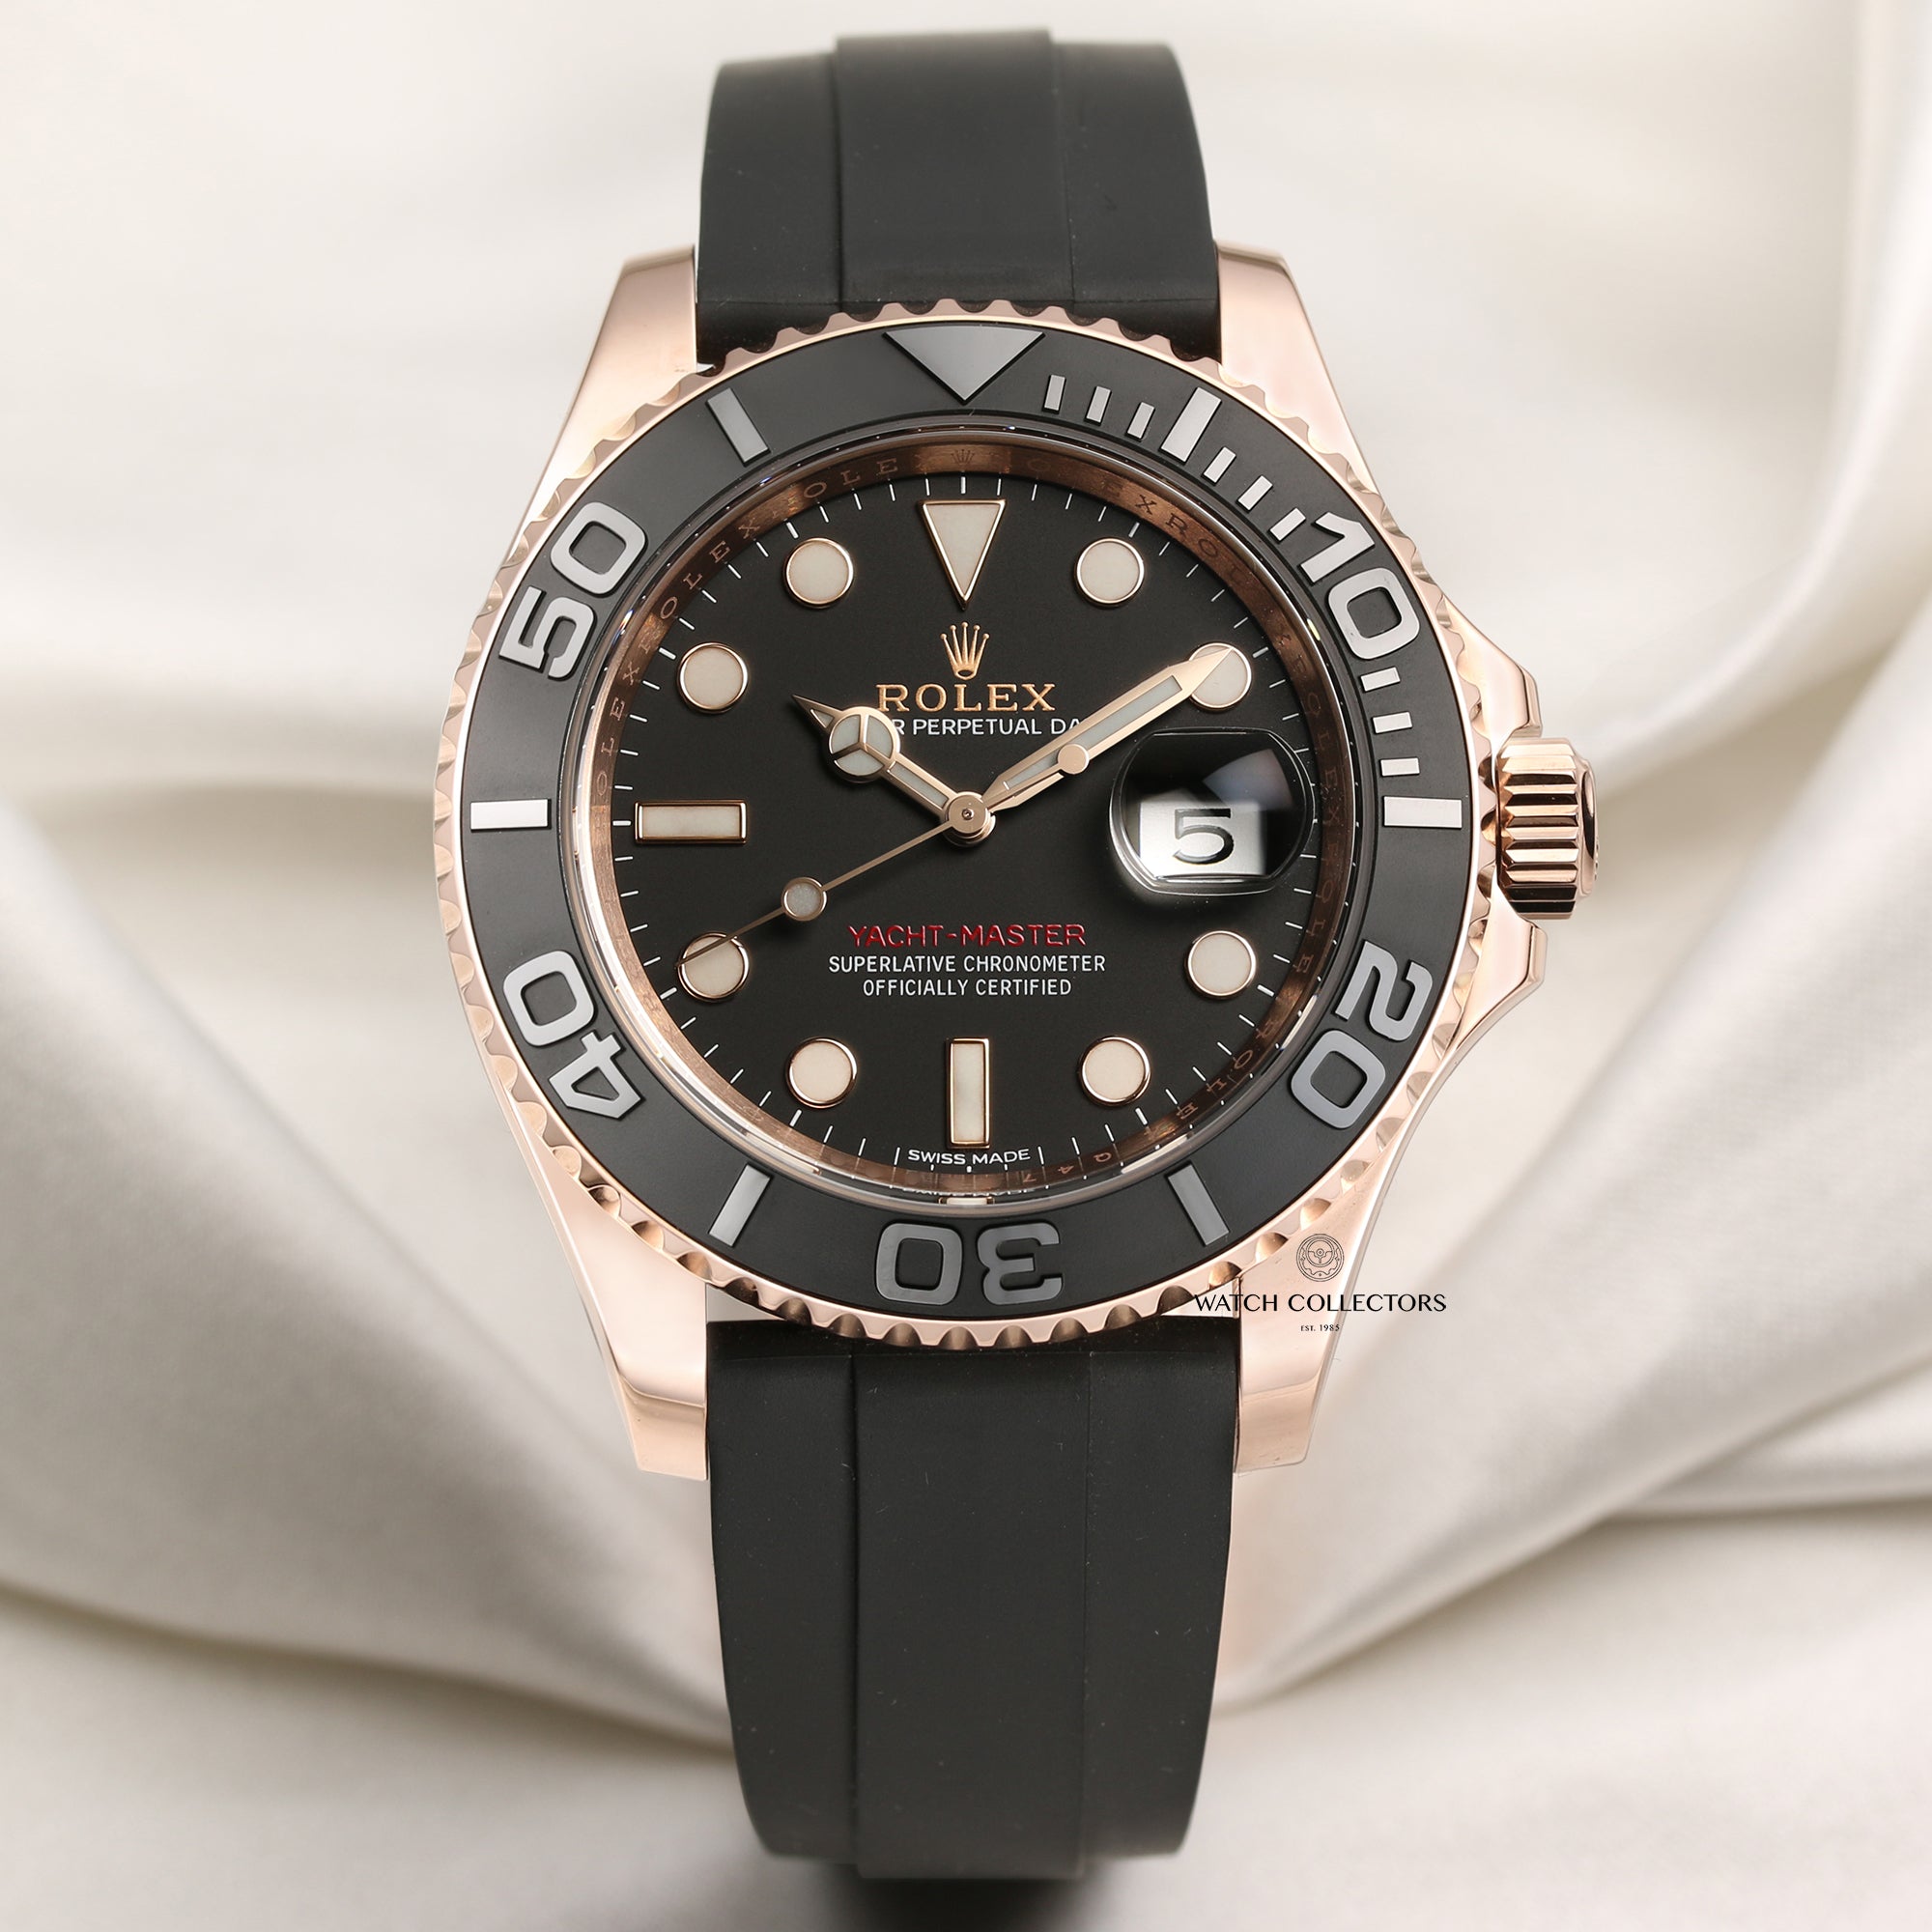 Rolex Yacht-Master 116655 18k Rose Gold – Watch Collectors